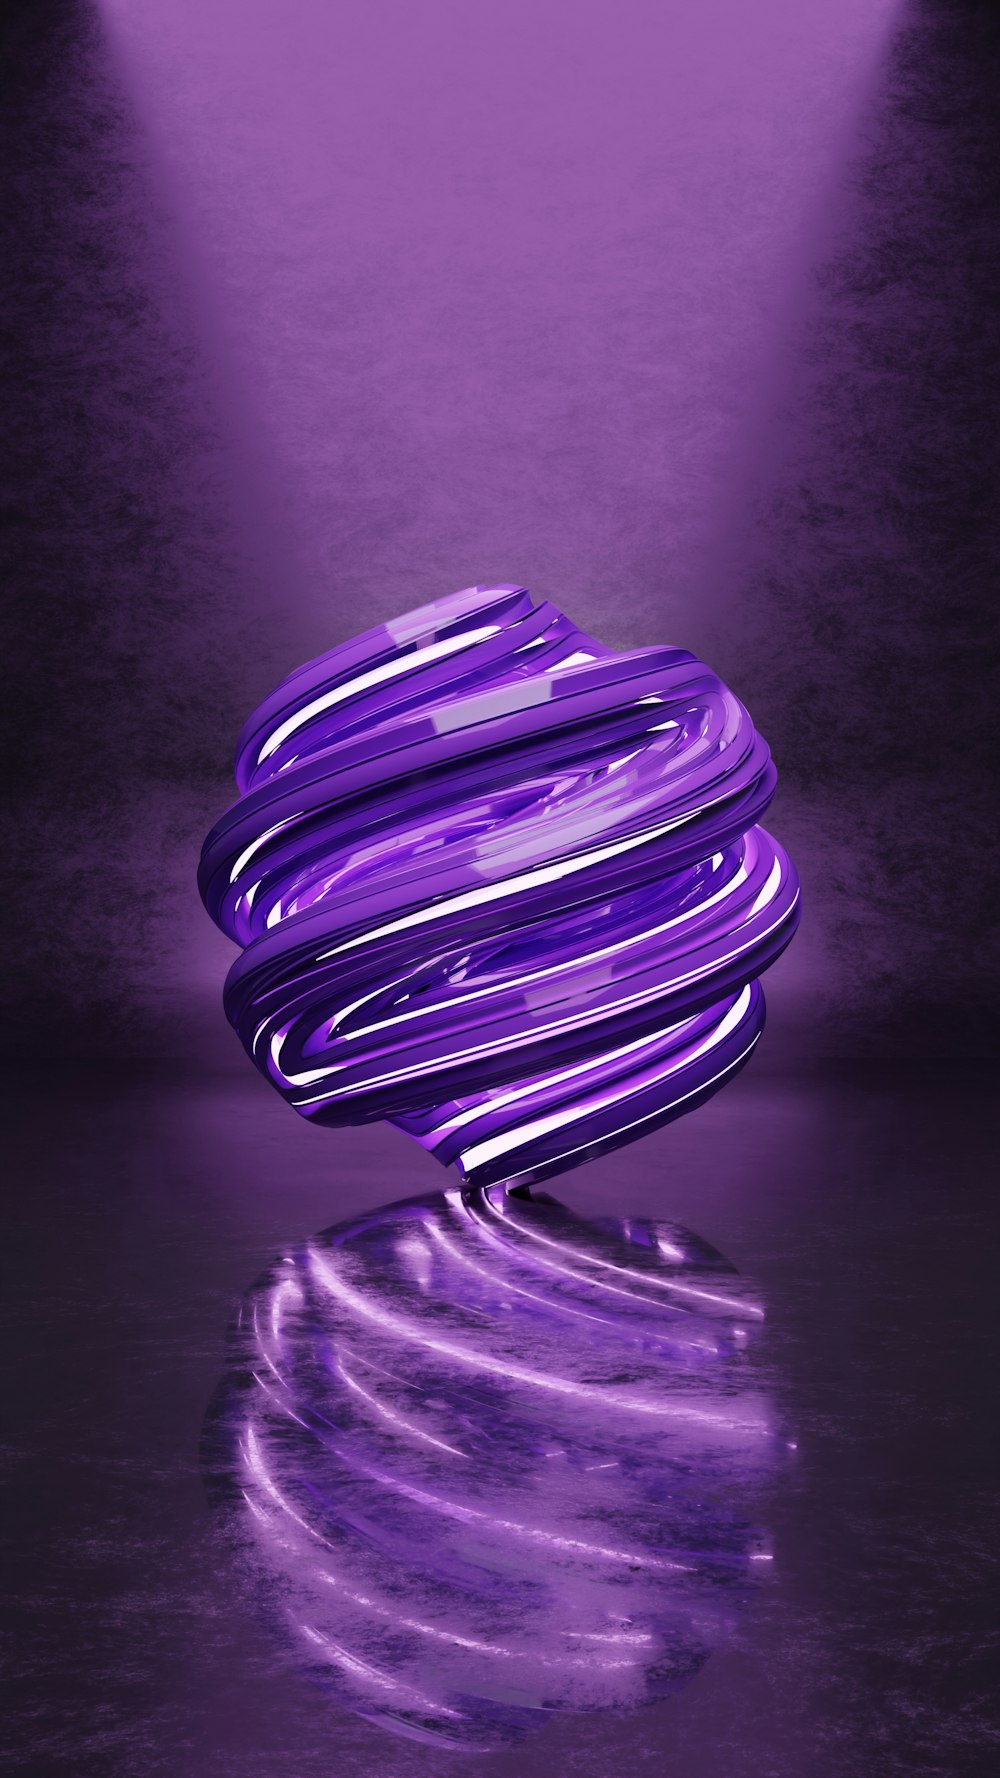 a purple object sitting on top of a reflective surface